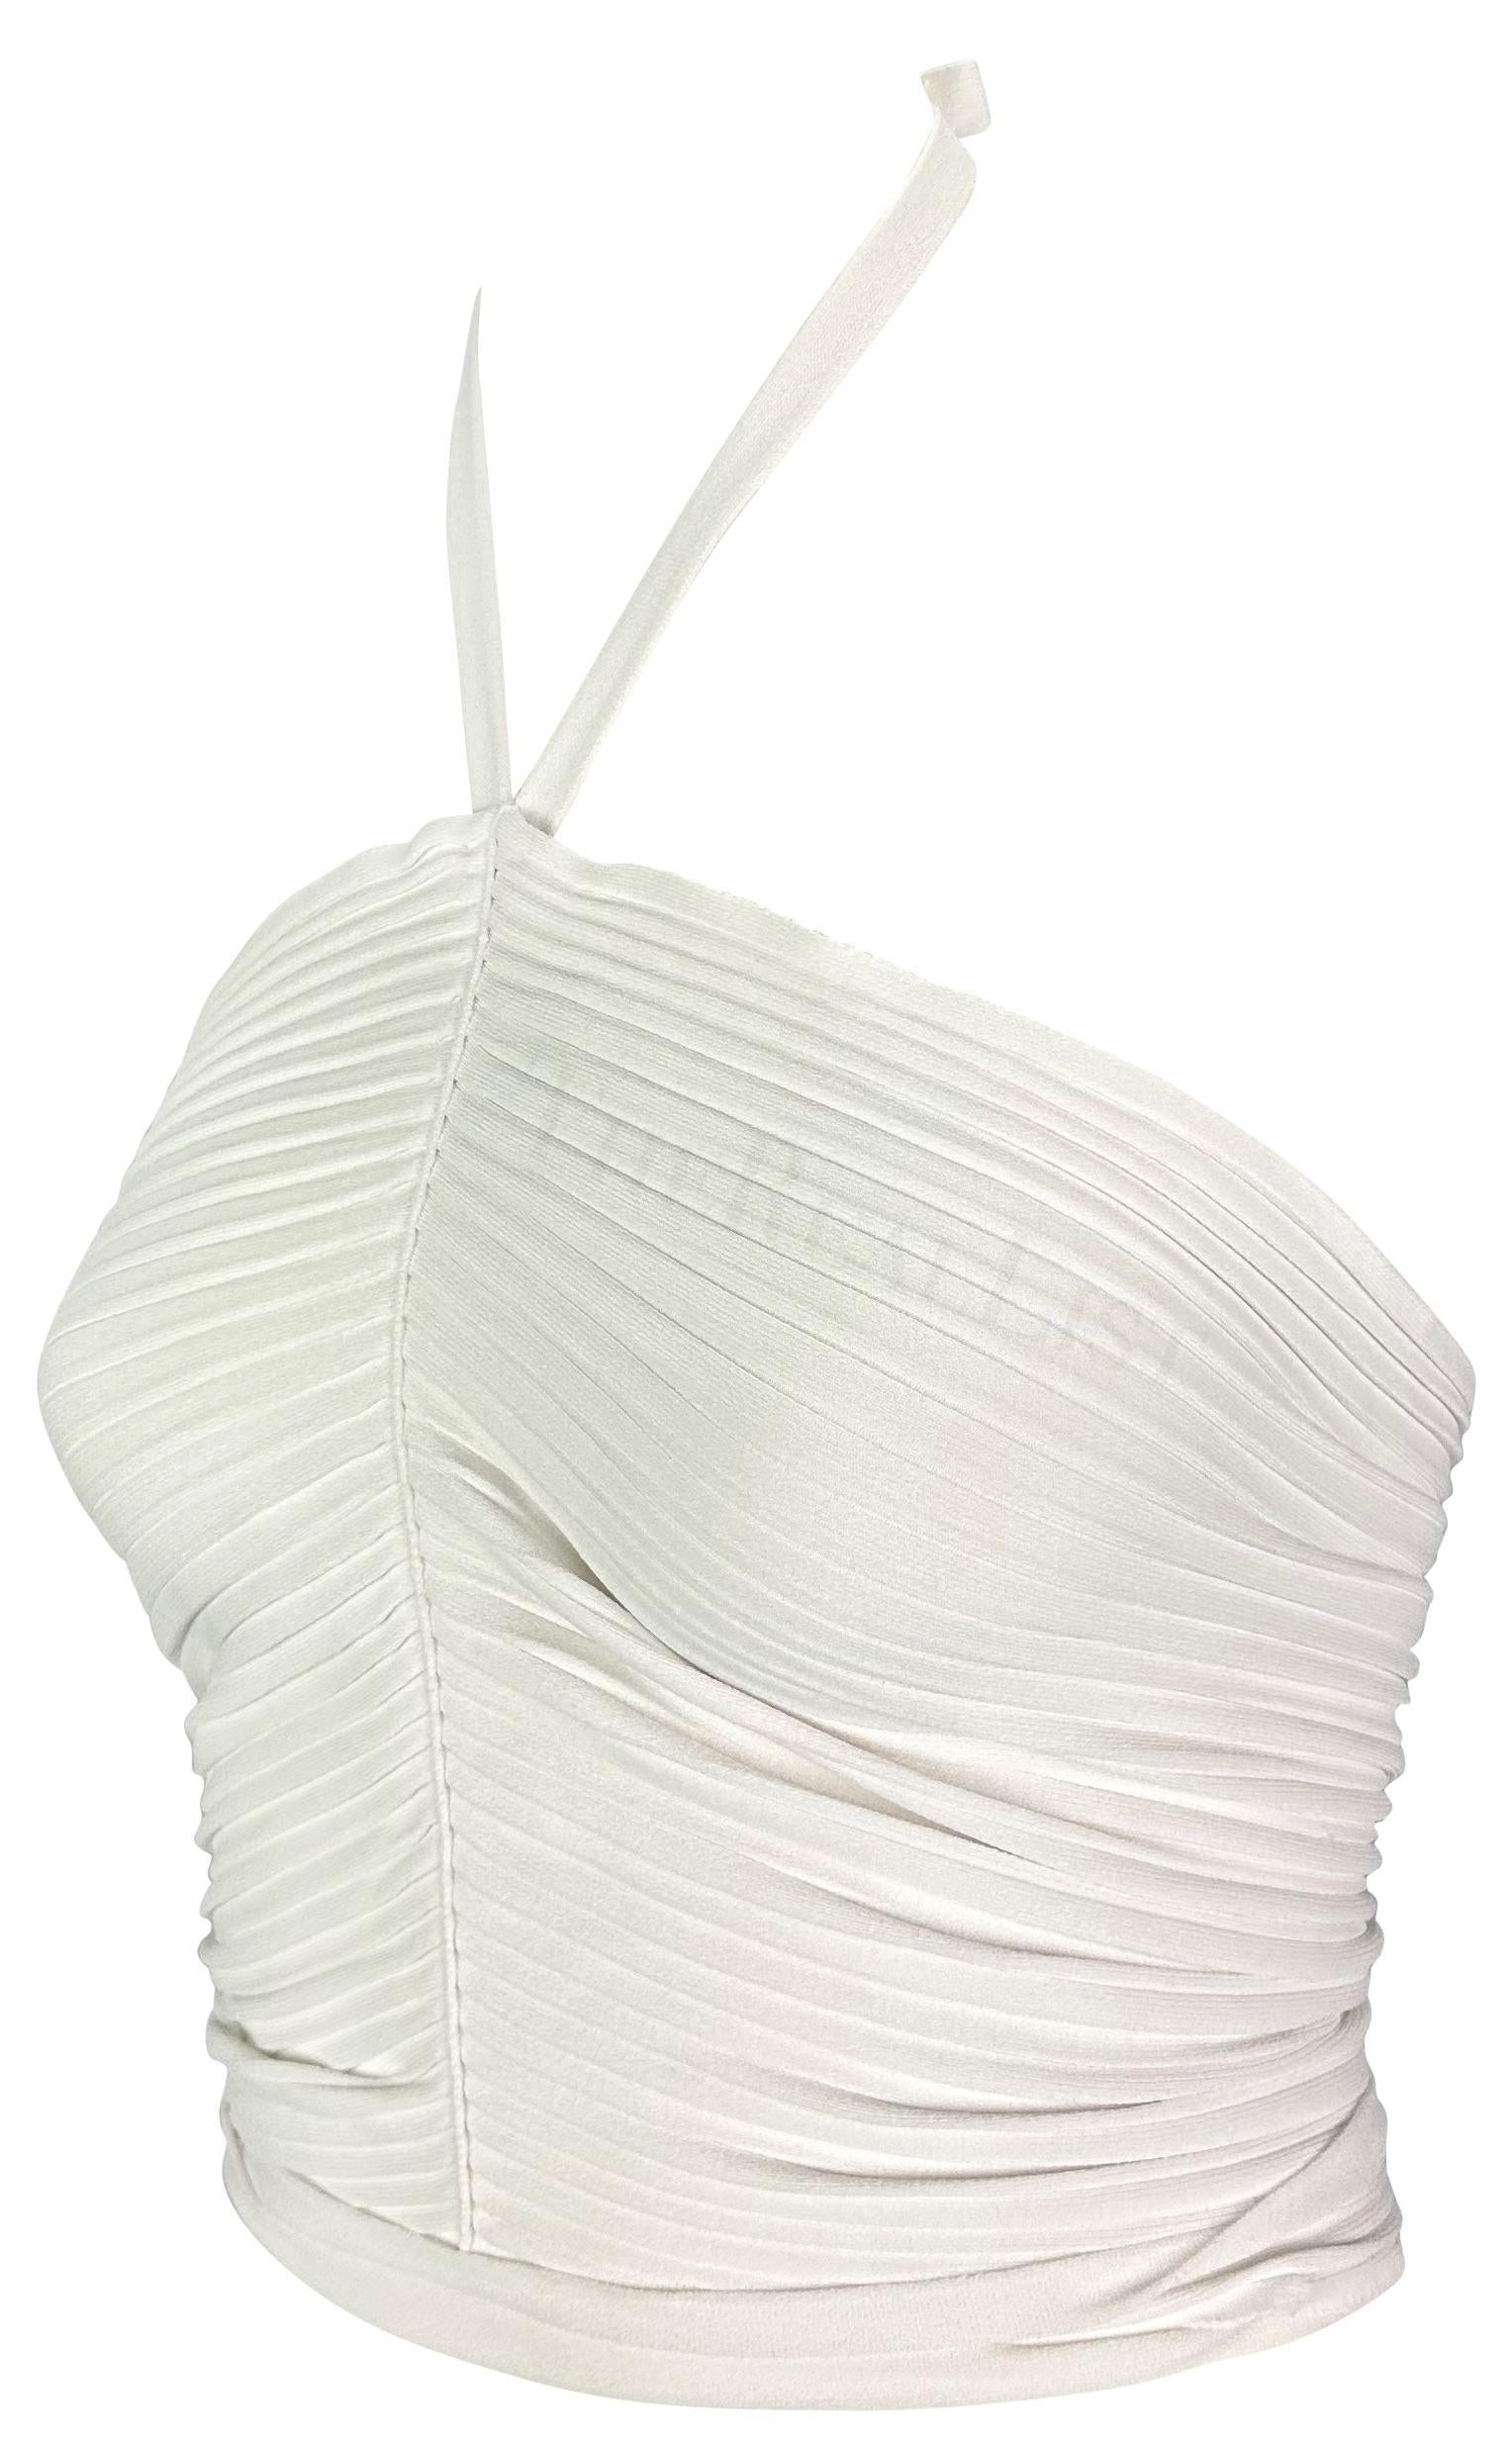 Presenting a form-fitting white Gucci cropped halterneck top, designed by Tom Ford. From the Spring/Summer 2000 collection, this ribbed top clings to the body. Featuring a seam down the front, this halterneck top naturally ruches and is made